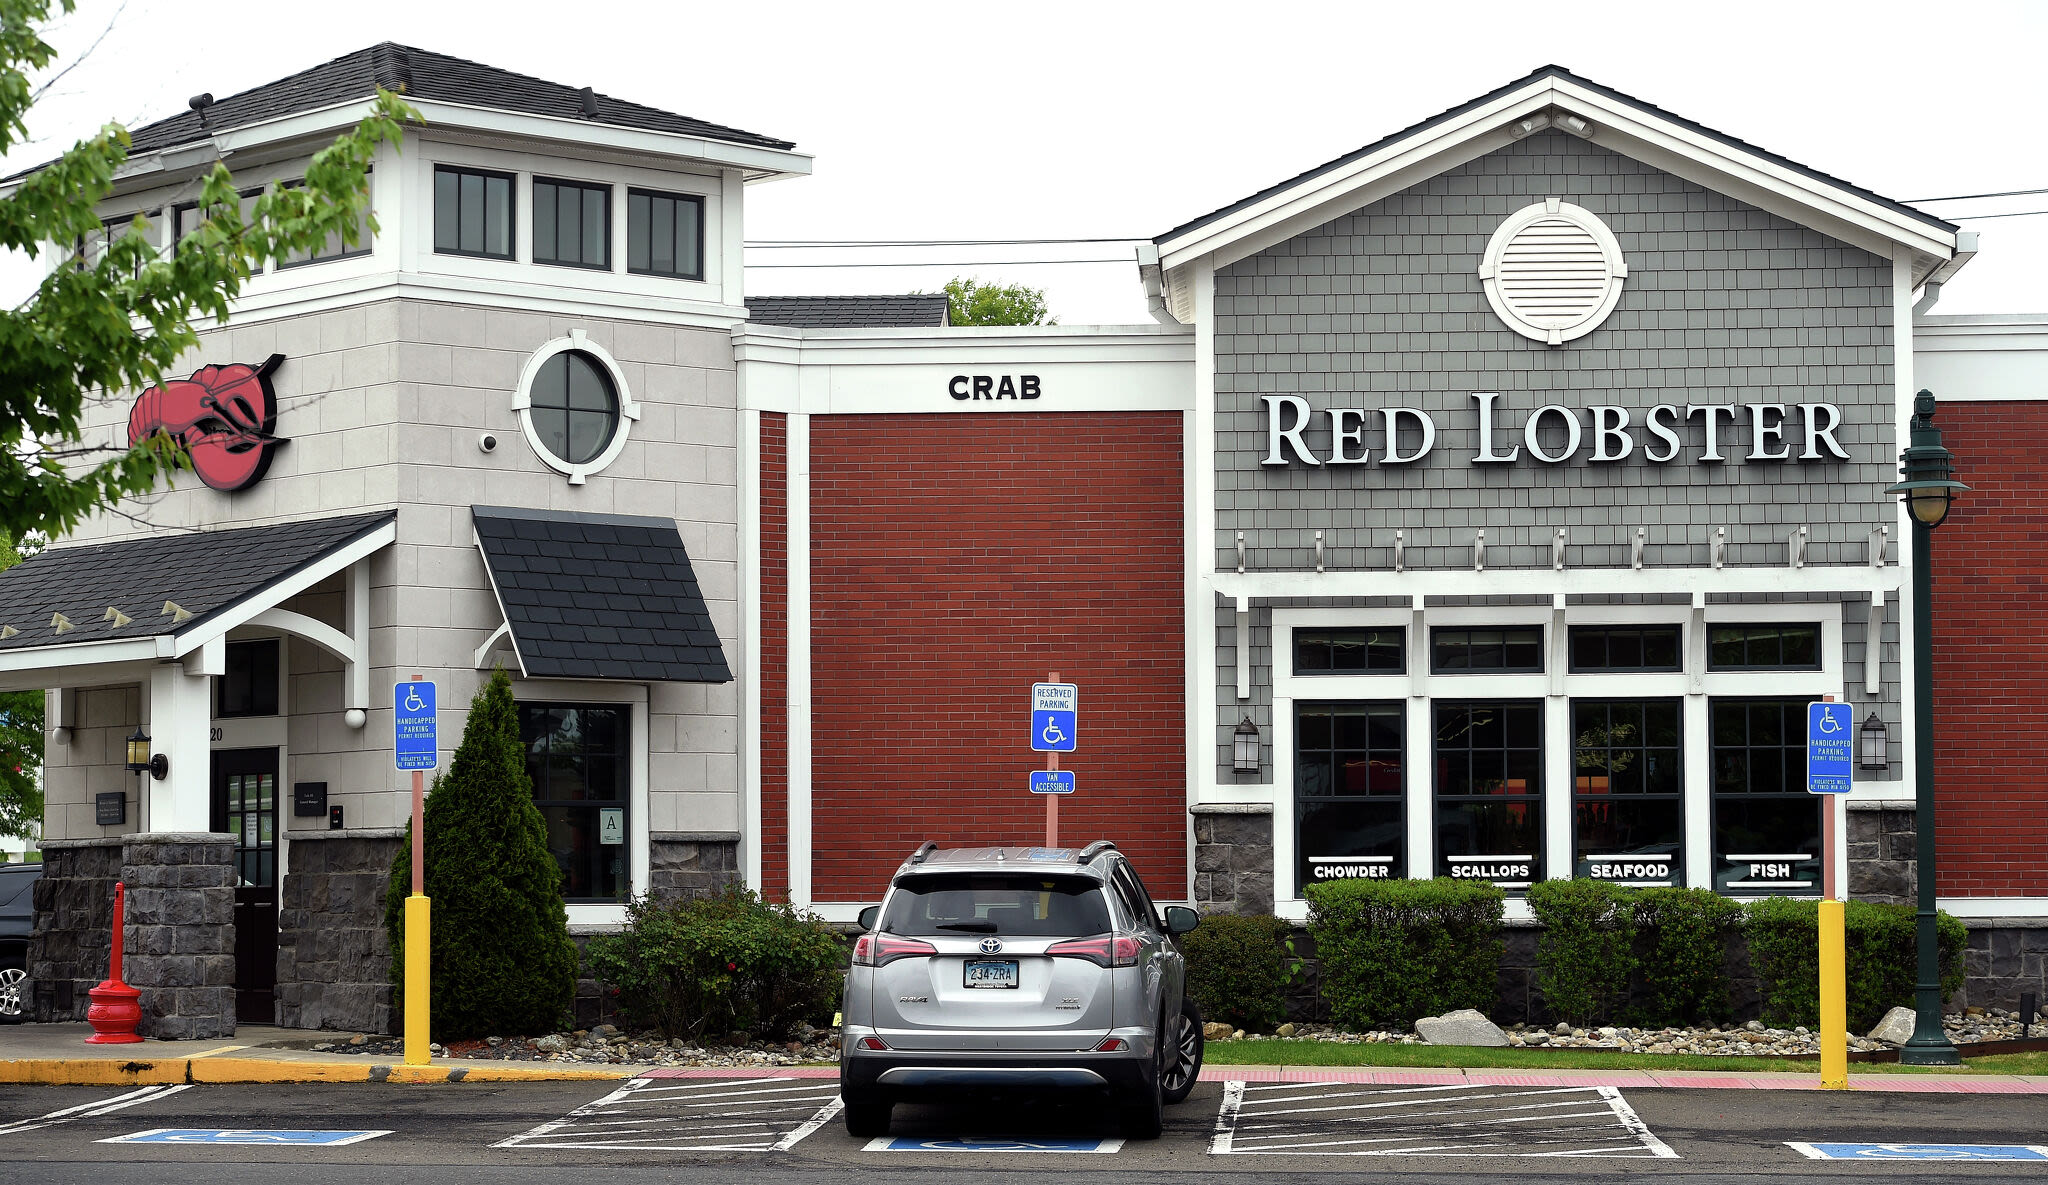 Blaming 'endless shrimp' promotion and costs, Red Lobster files for bankruptcy. Here's what it means in CT.